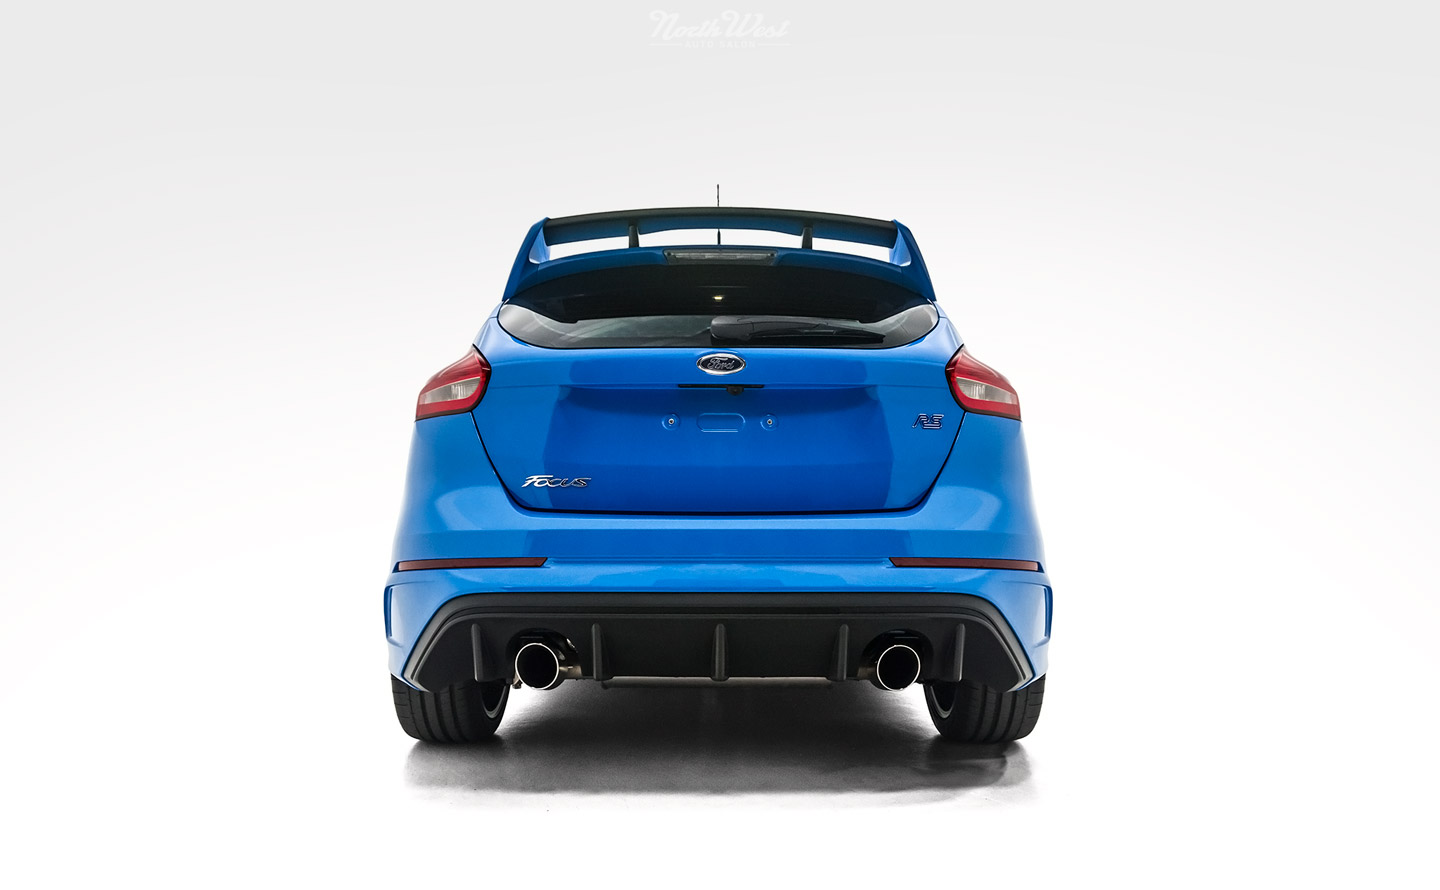 Ford-Focus-RS-new-car-detail-xpel-paint-protection-spectra-photosync-window-tint-ceramic-pro-silver-rear-s